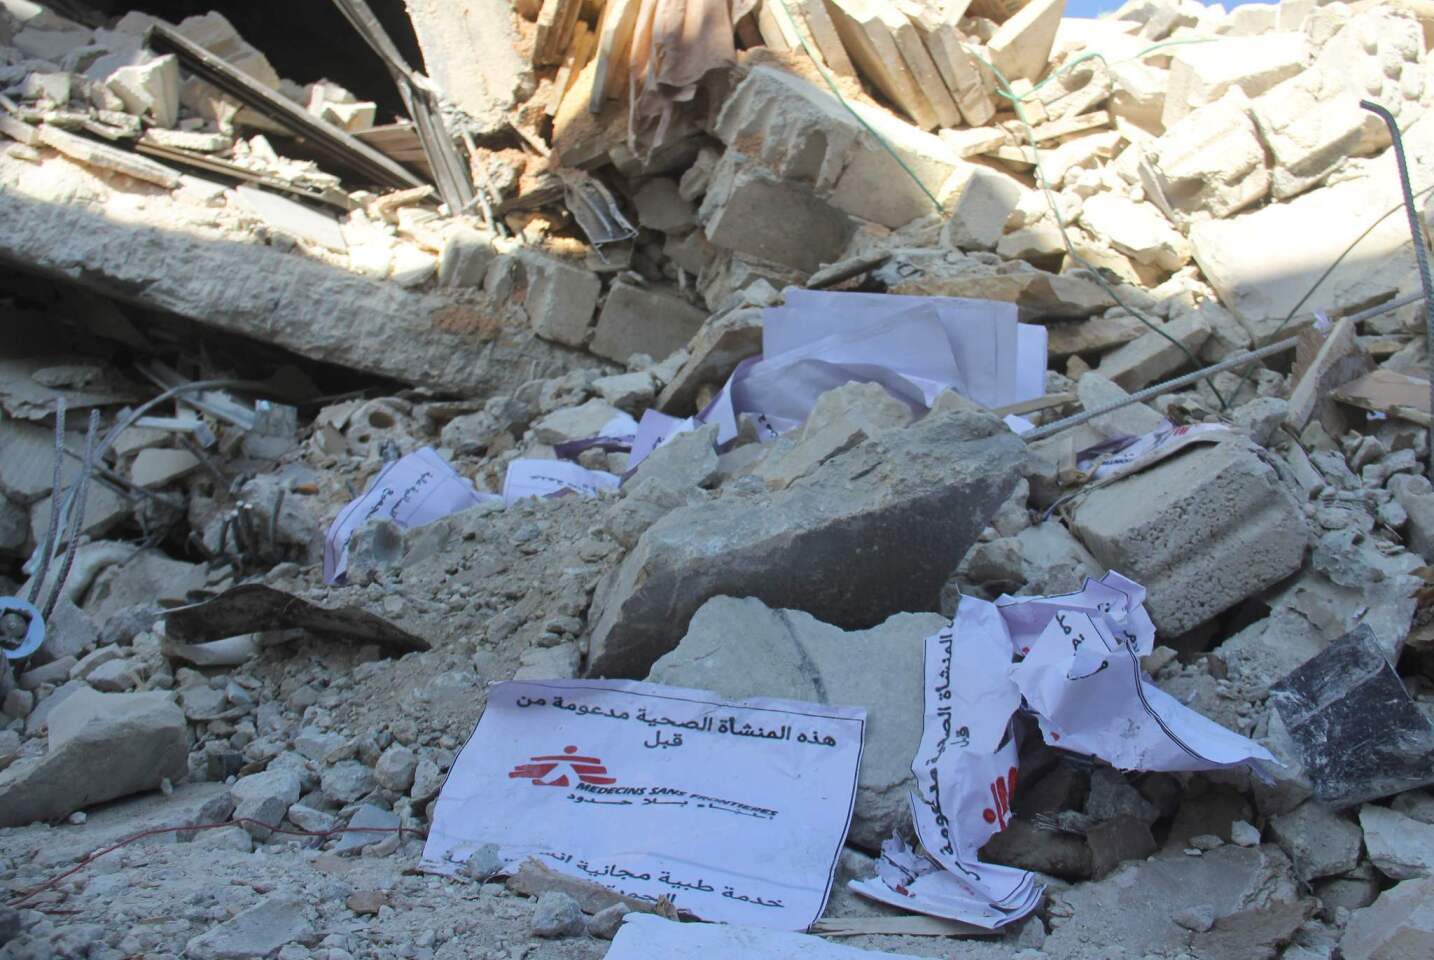 Doctors Without Borders hospital bombed